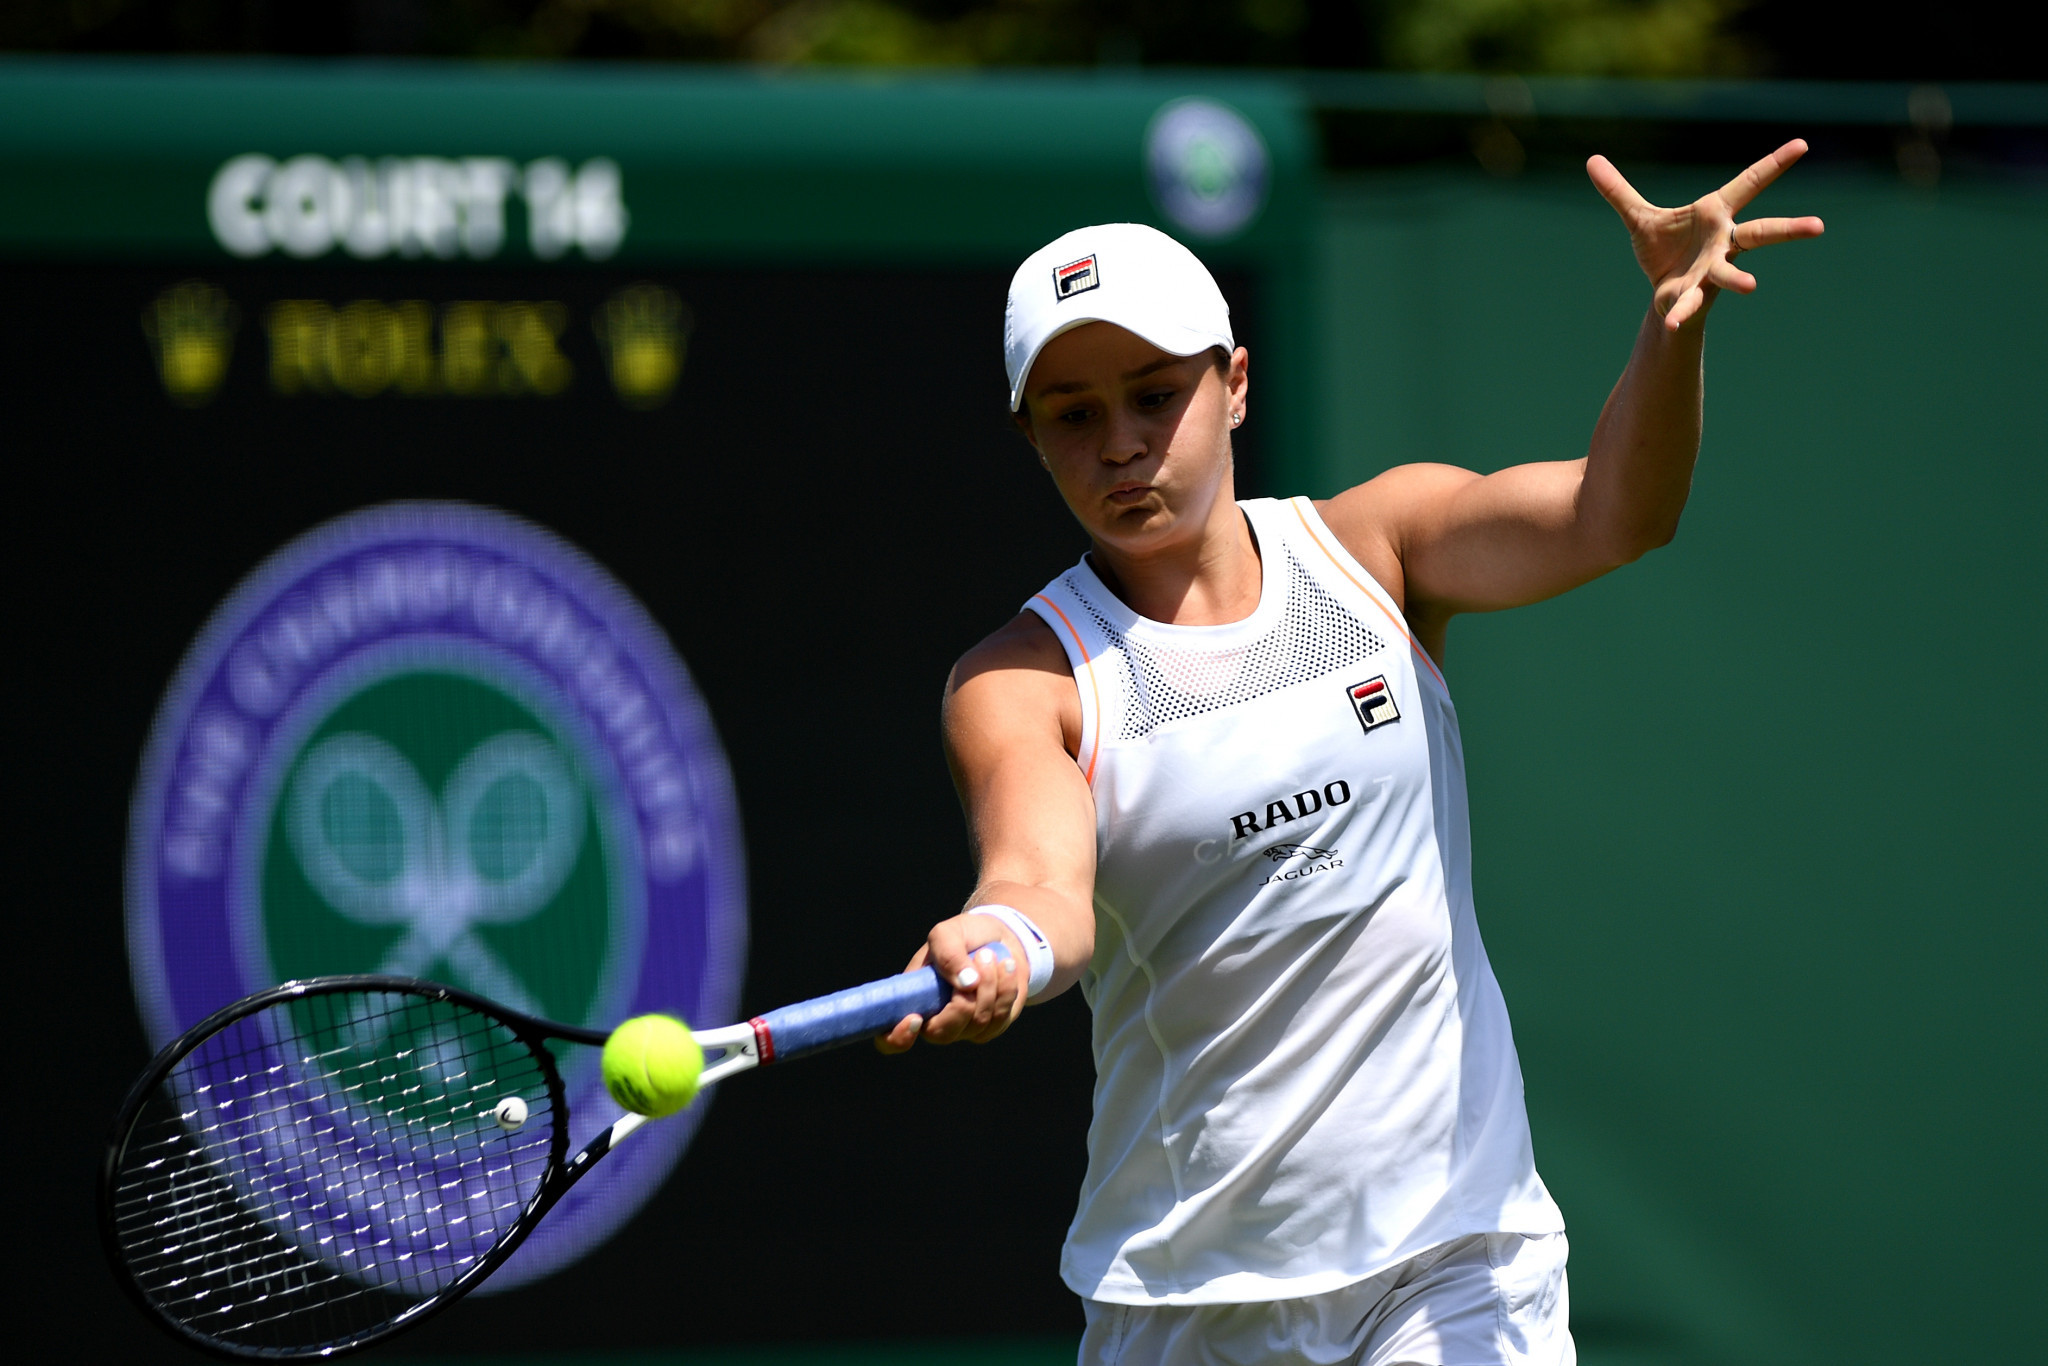 Australia's Ashleigh Barty is the top seed in the women's singles draw at Wimbledon ©Getty Images